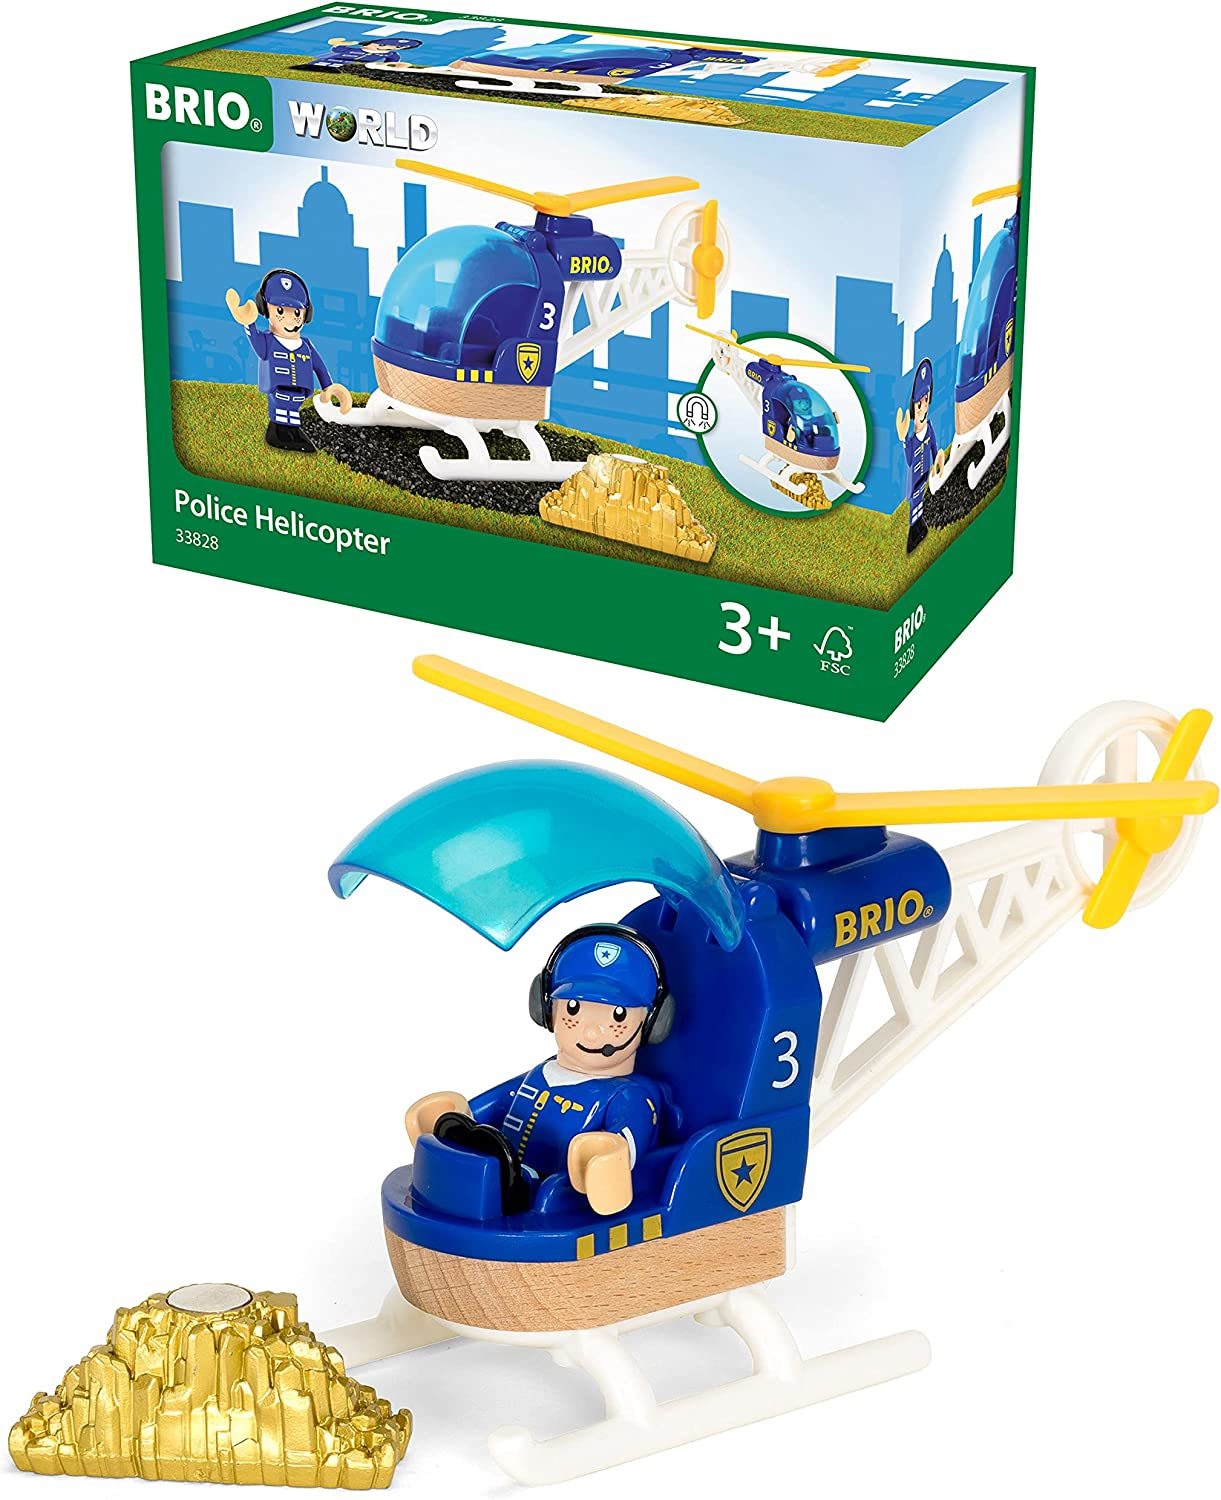 Brio World Police Helicopter with Gold 33828